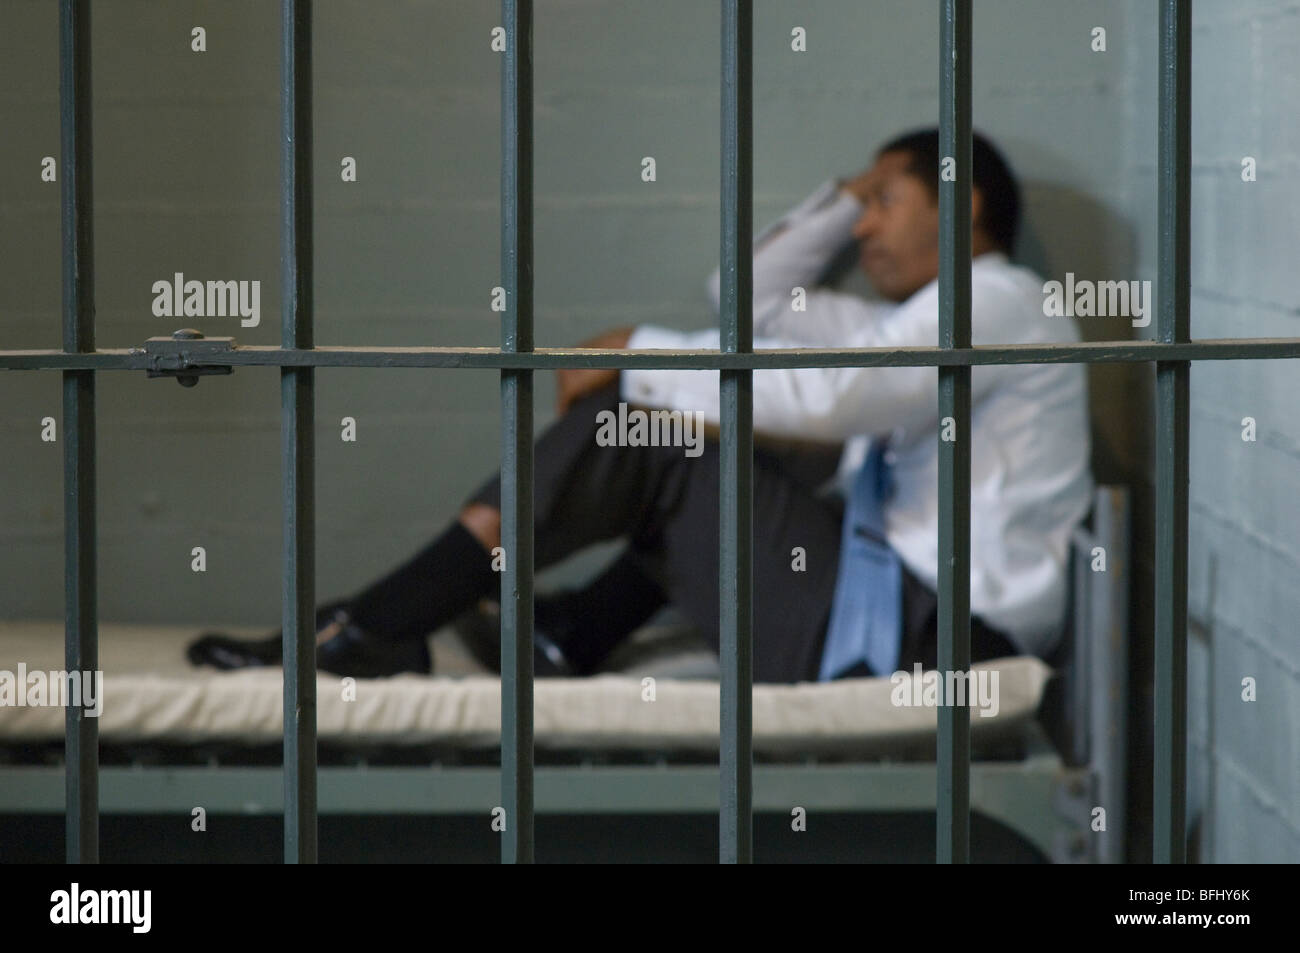 Mature man sitting on bed in prison cell Stock Photo